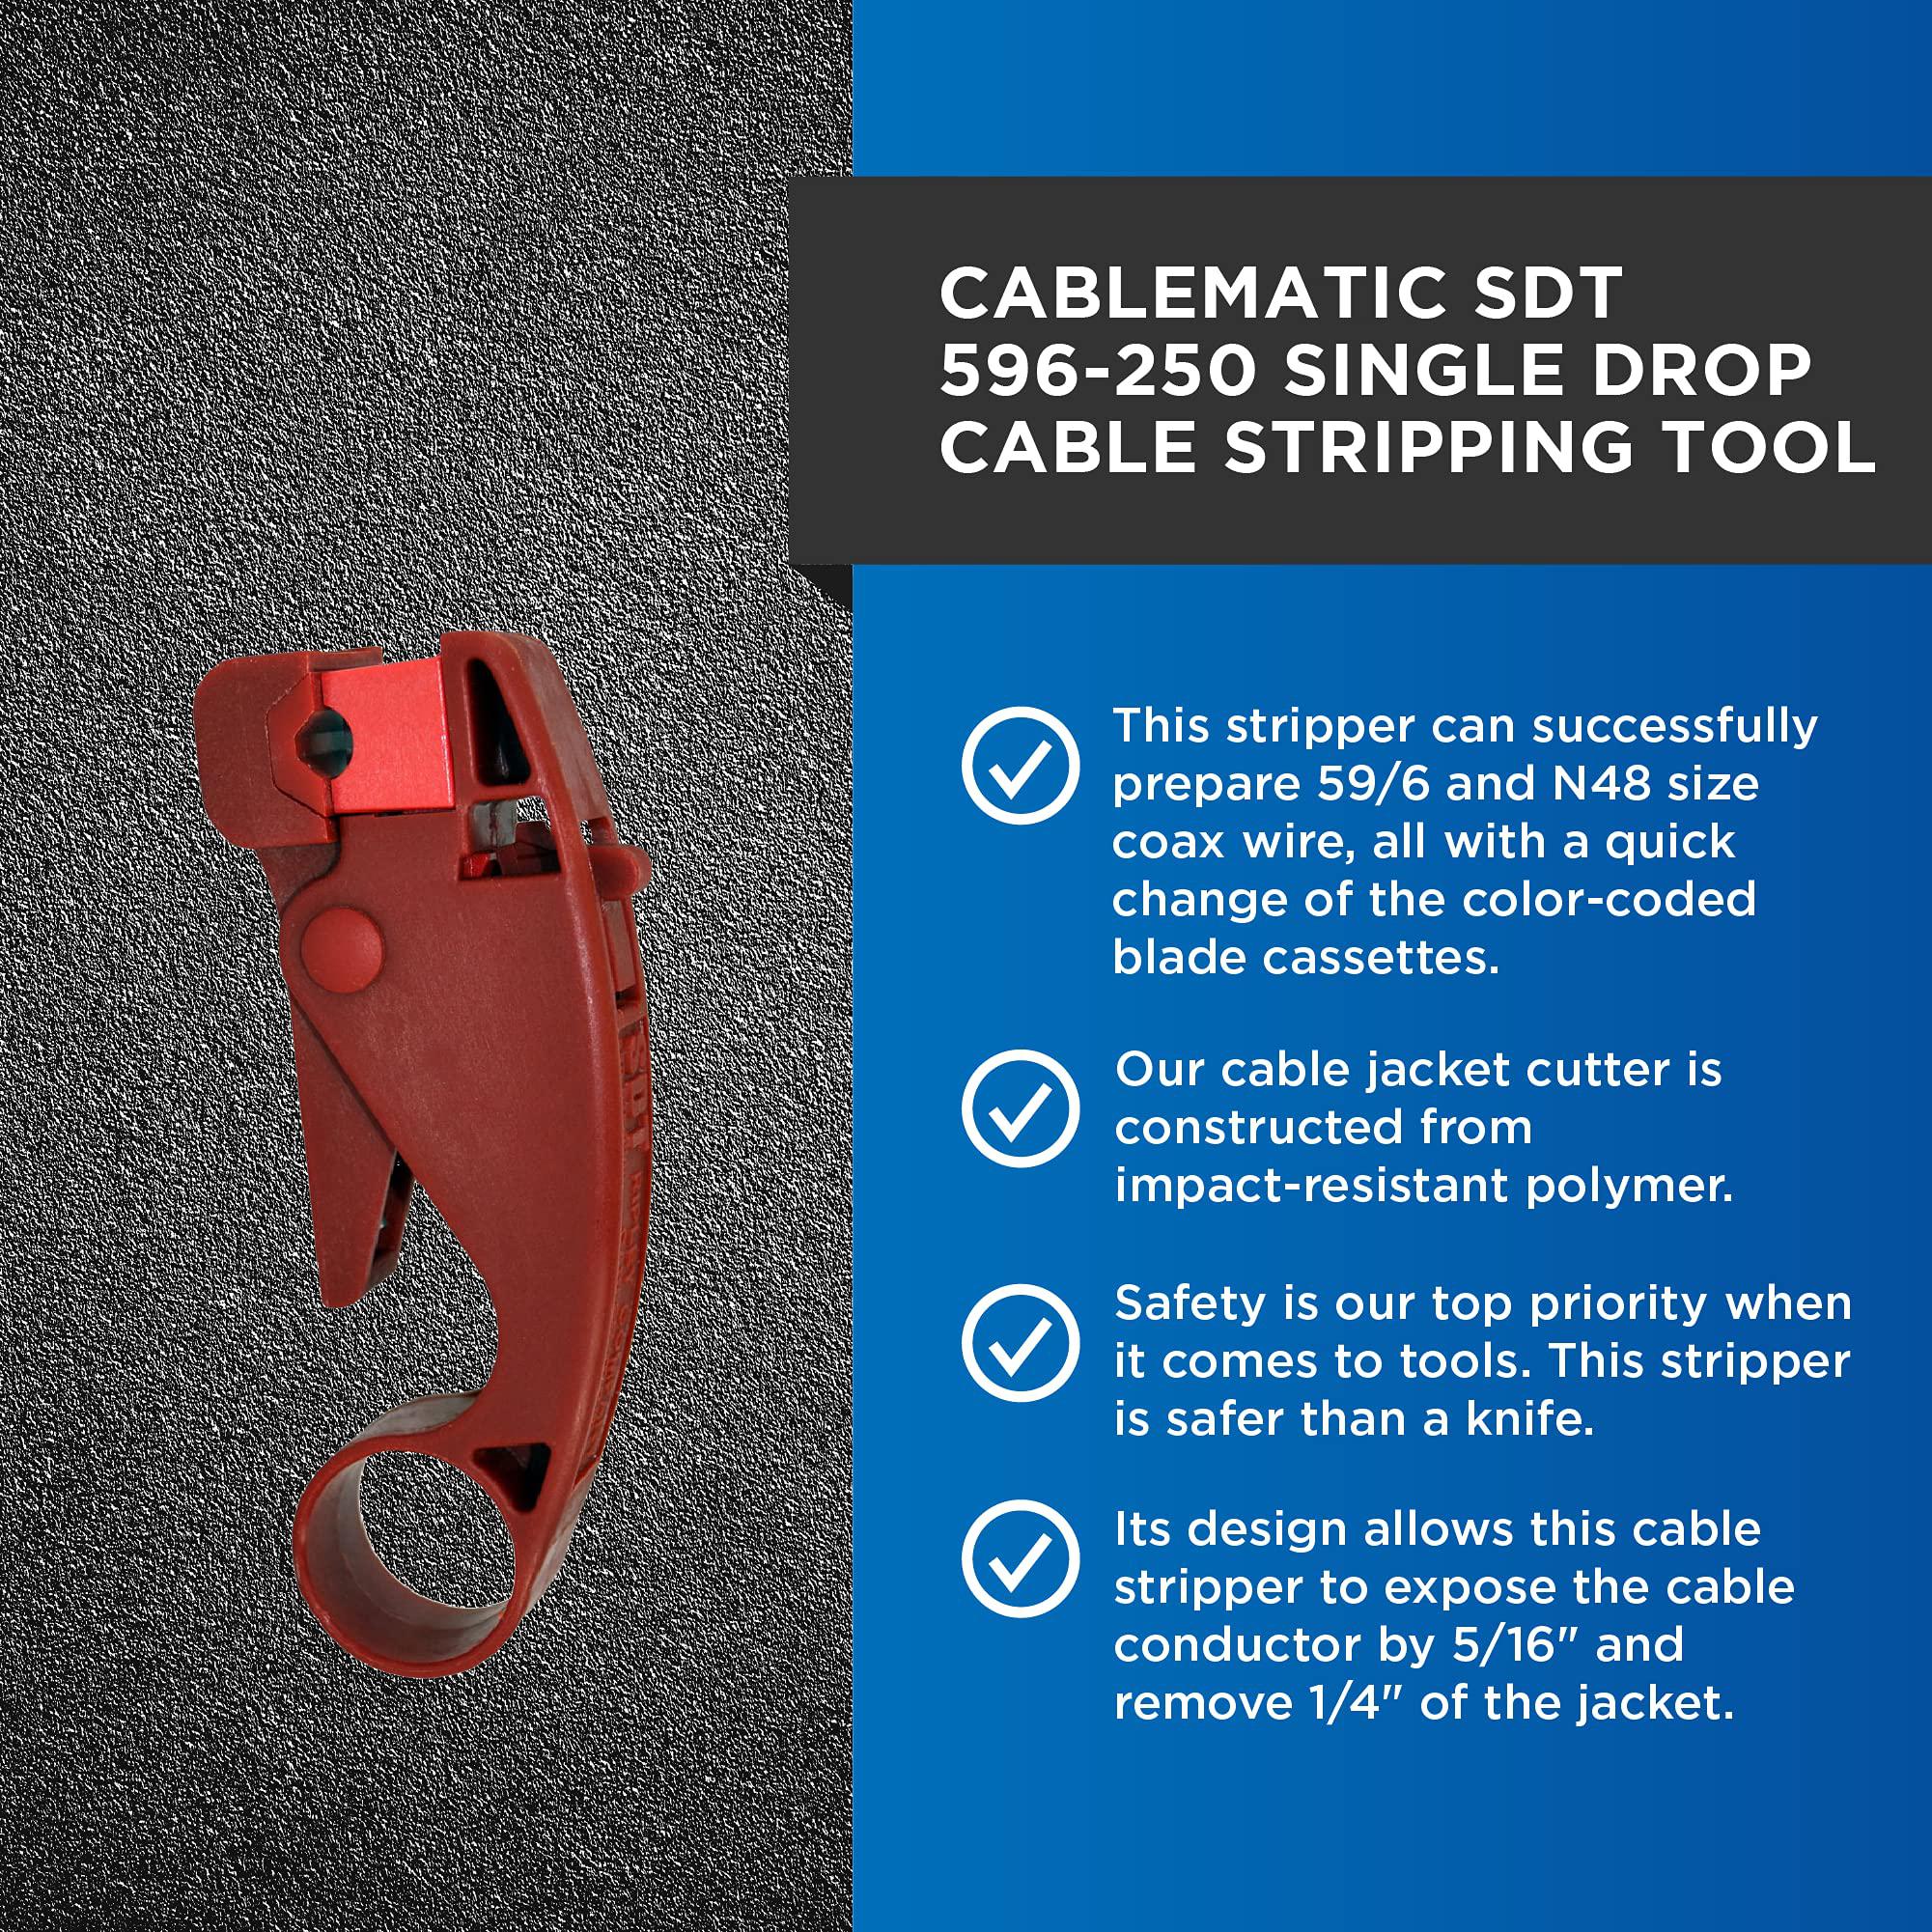 cablematic sdt 596-250 single drop cable stripping tool for professional technicians, electricians, and installers, easily po